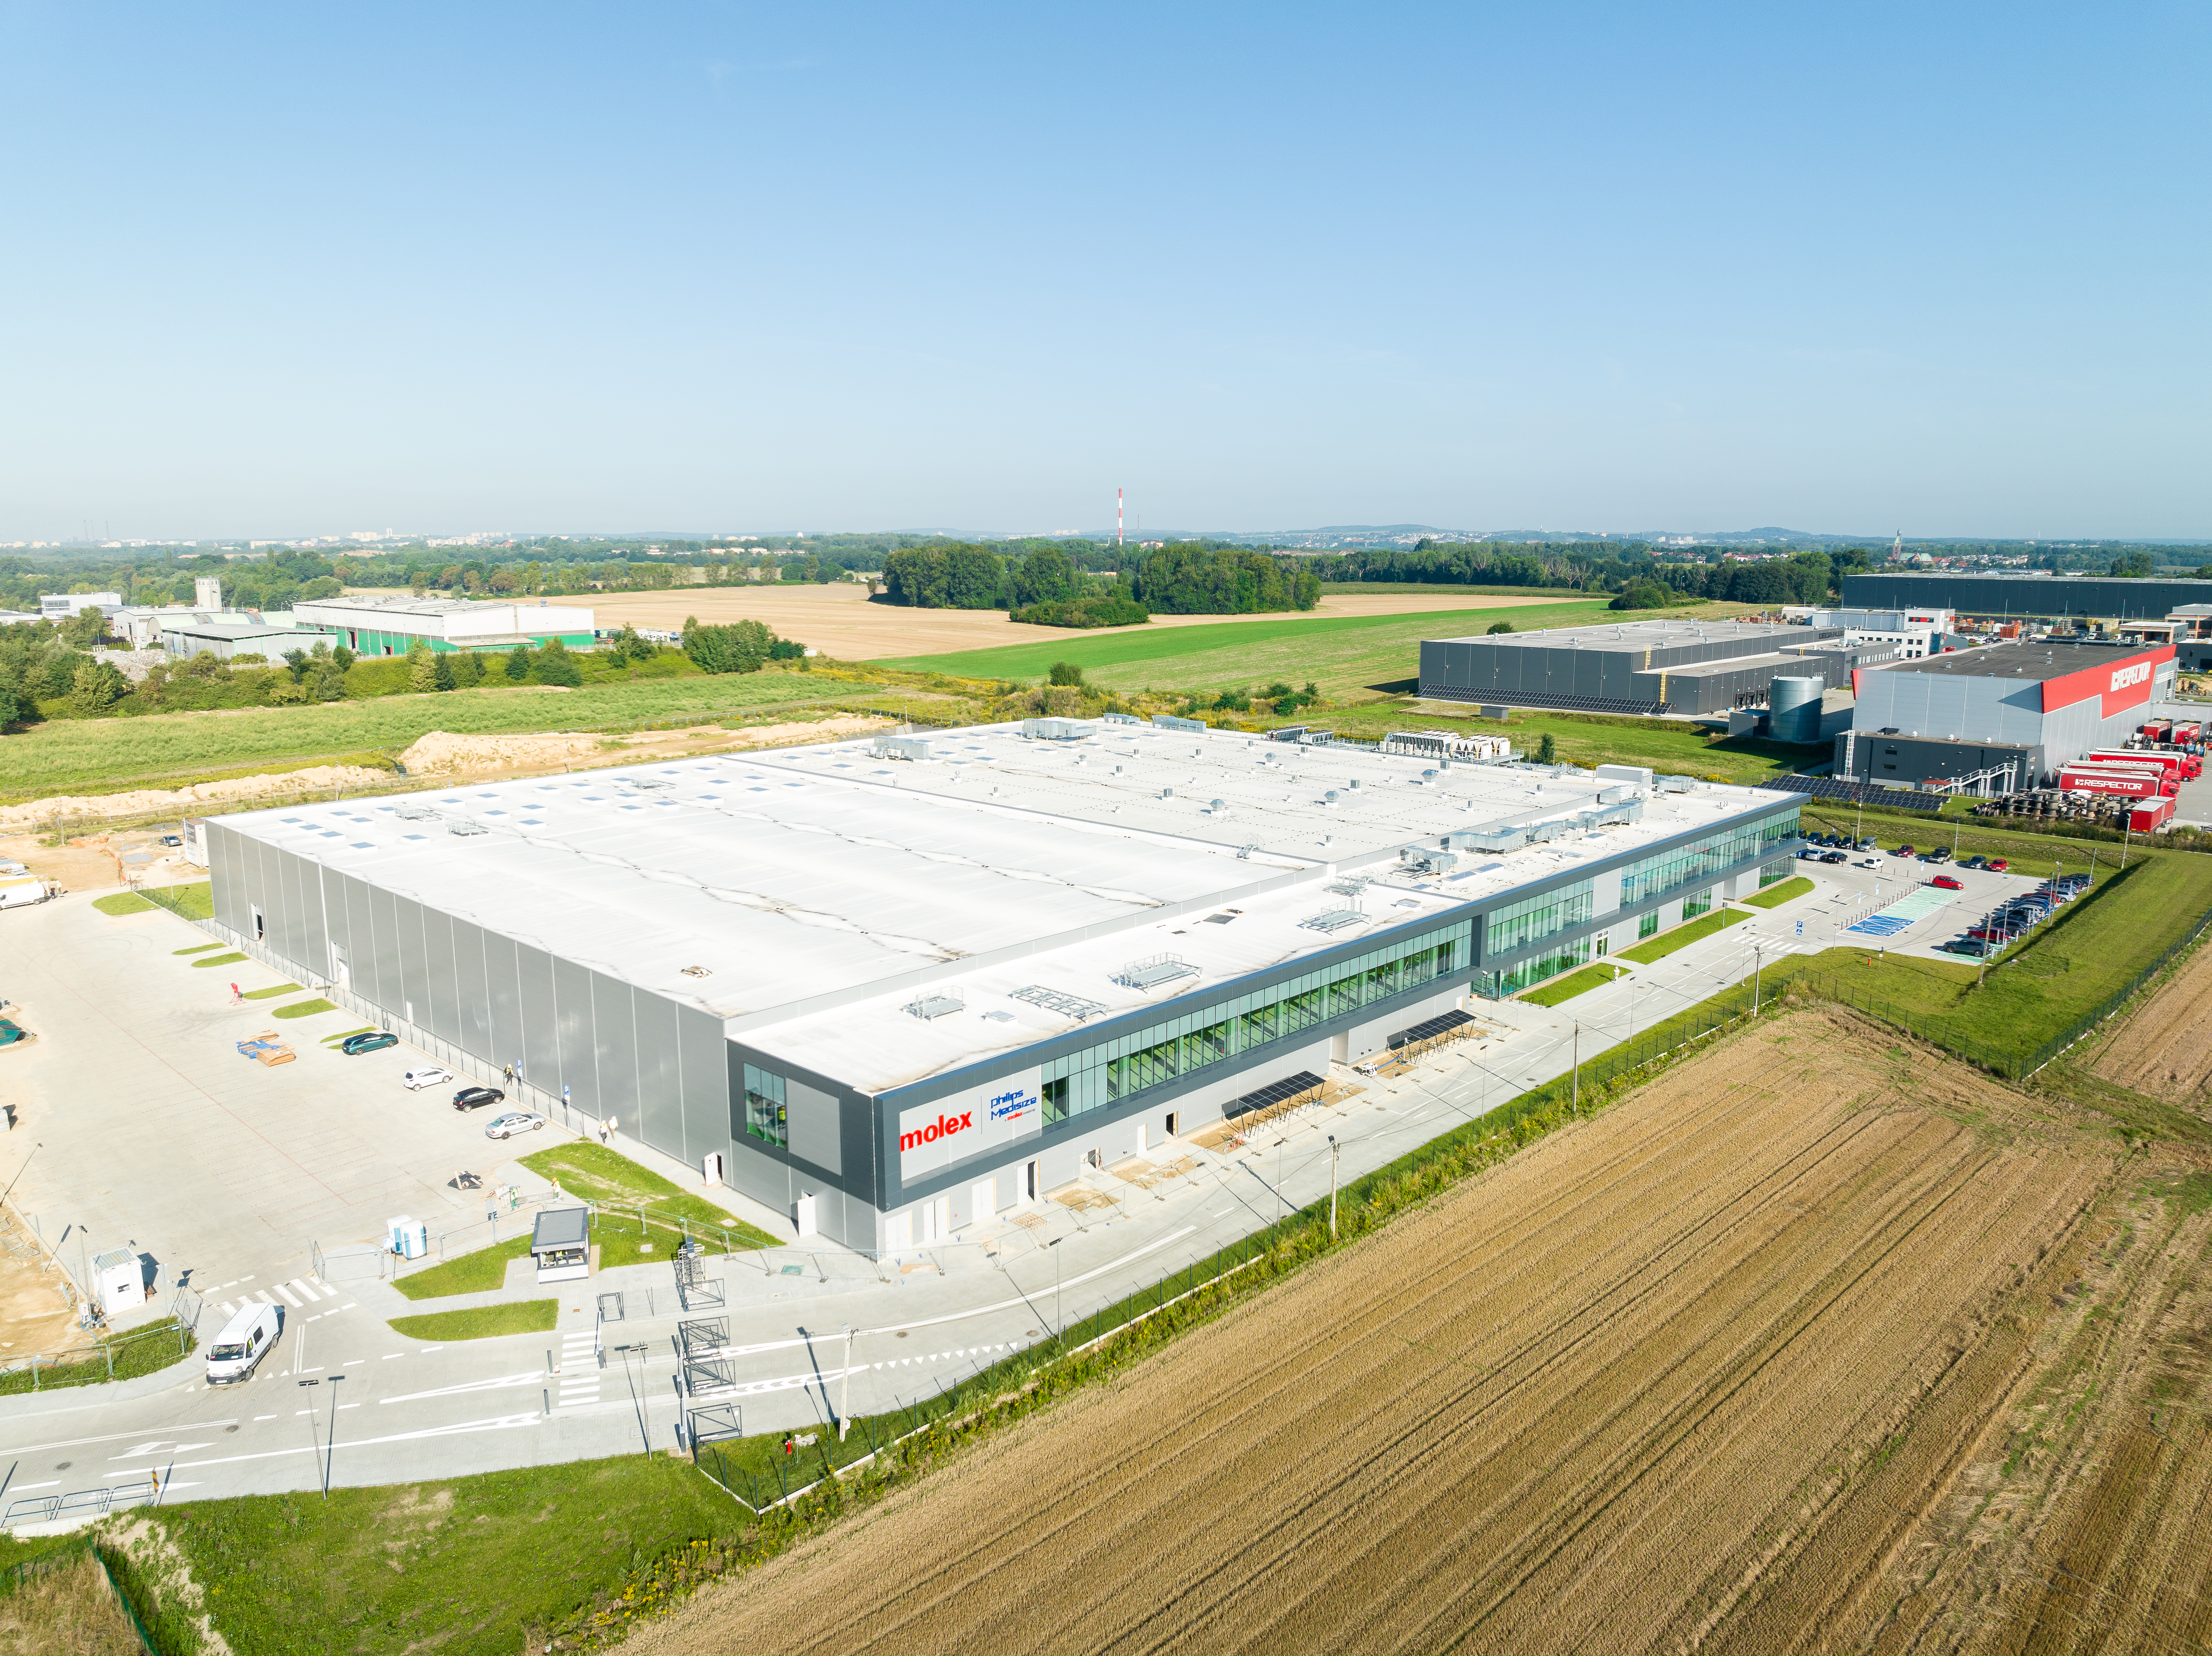 The new Molex Katowice campus reflects a significant investment that will deliver state-of-the art capabilities in a world-class manufacturing facility and create hundreds of new skilled jobs in this strategic location.